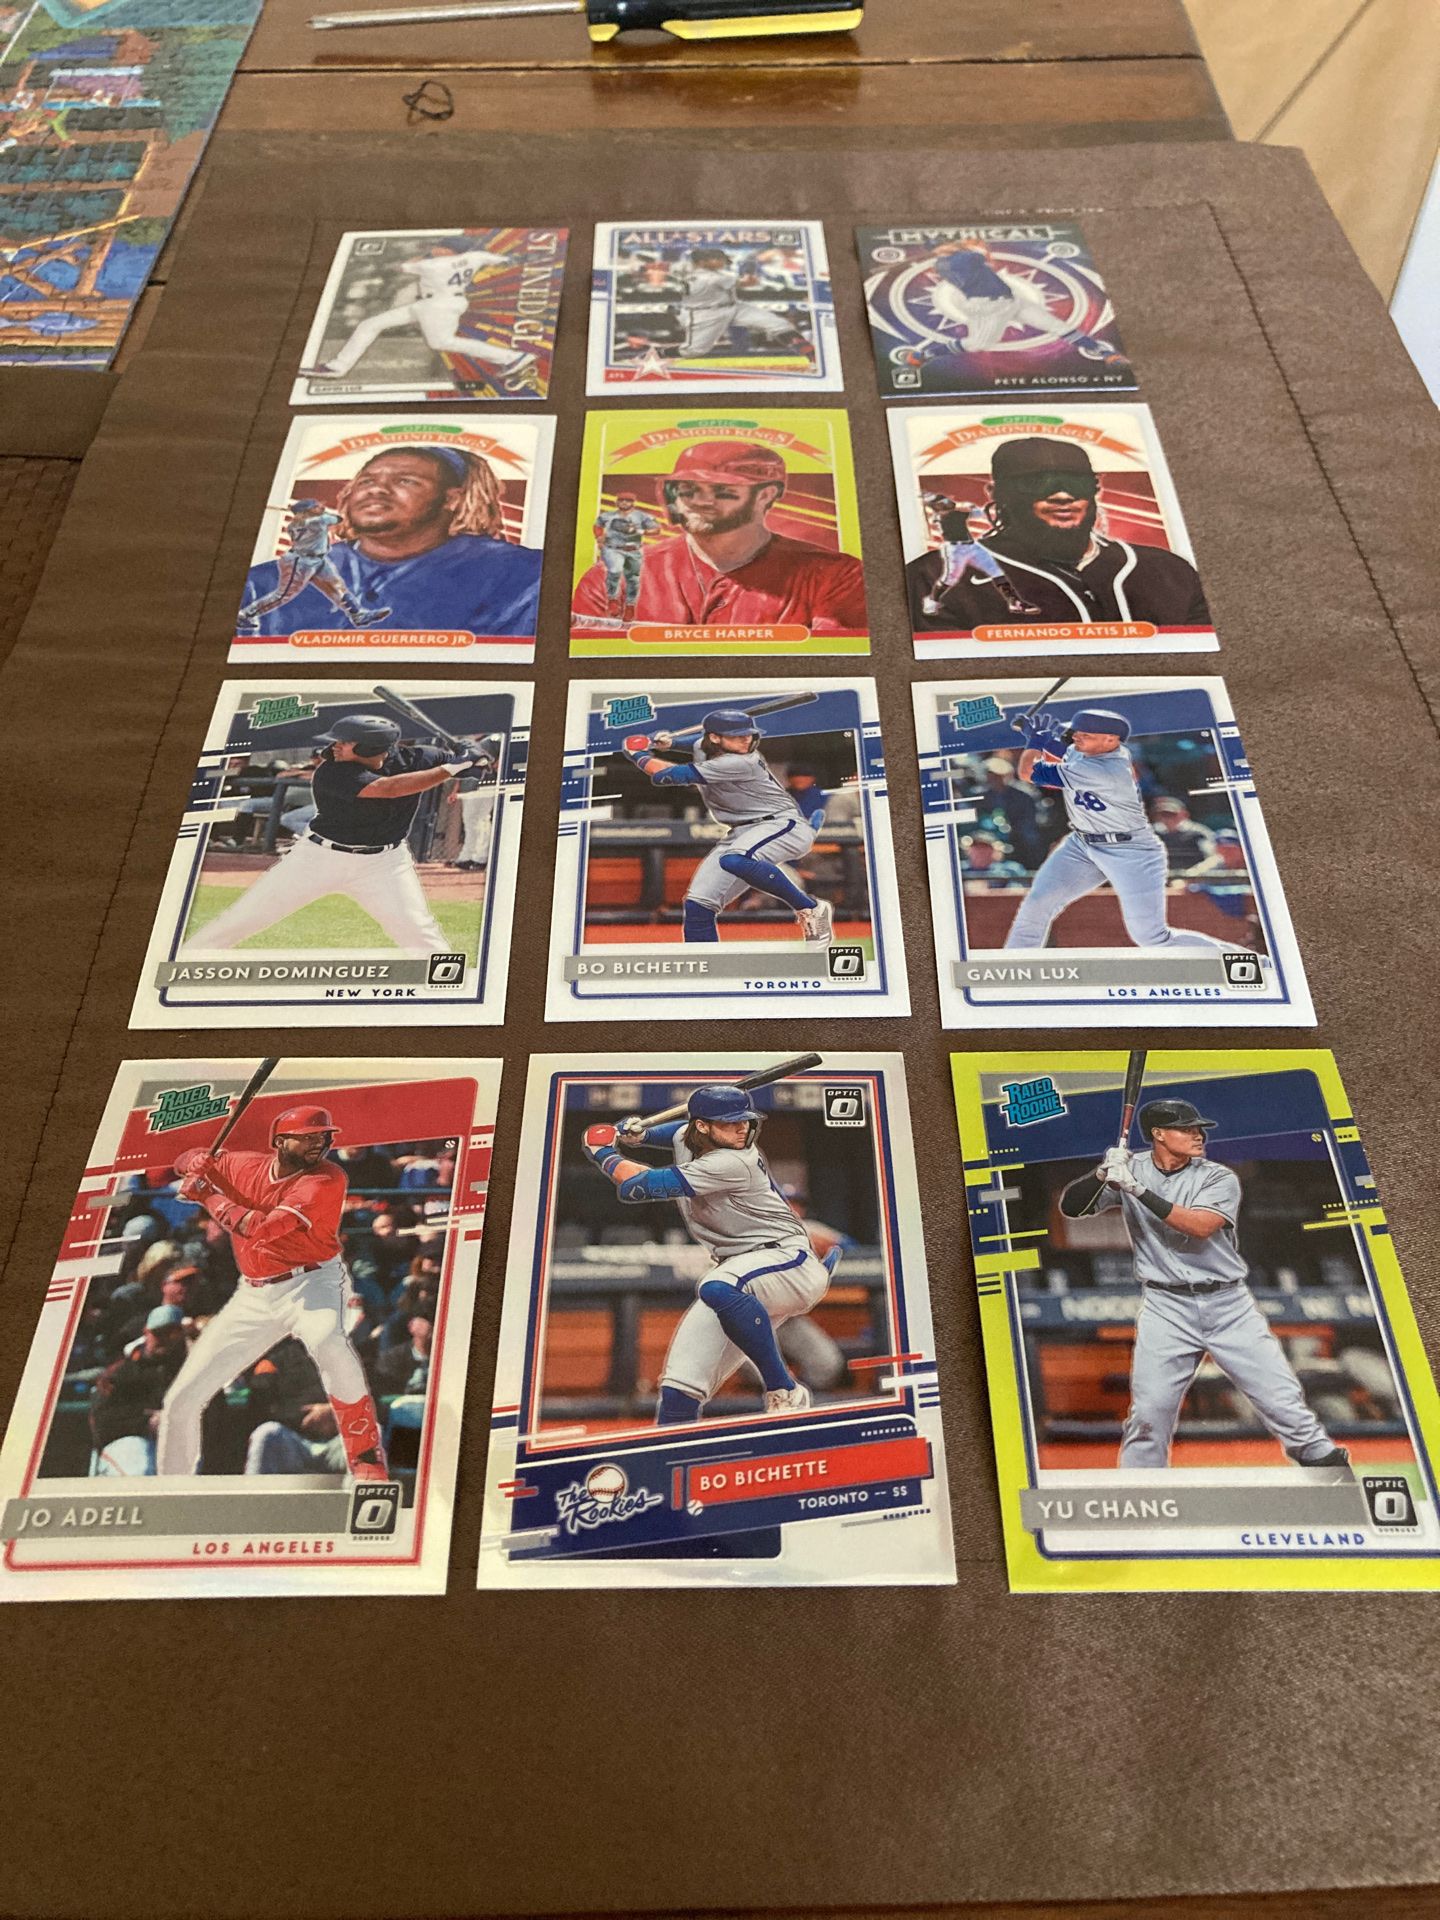 Donruss optic baseball 12 card lot rated rookies and stars Lux acuna Alonso Harper tatis bichette adell chang Dominguez